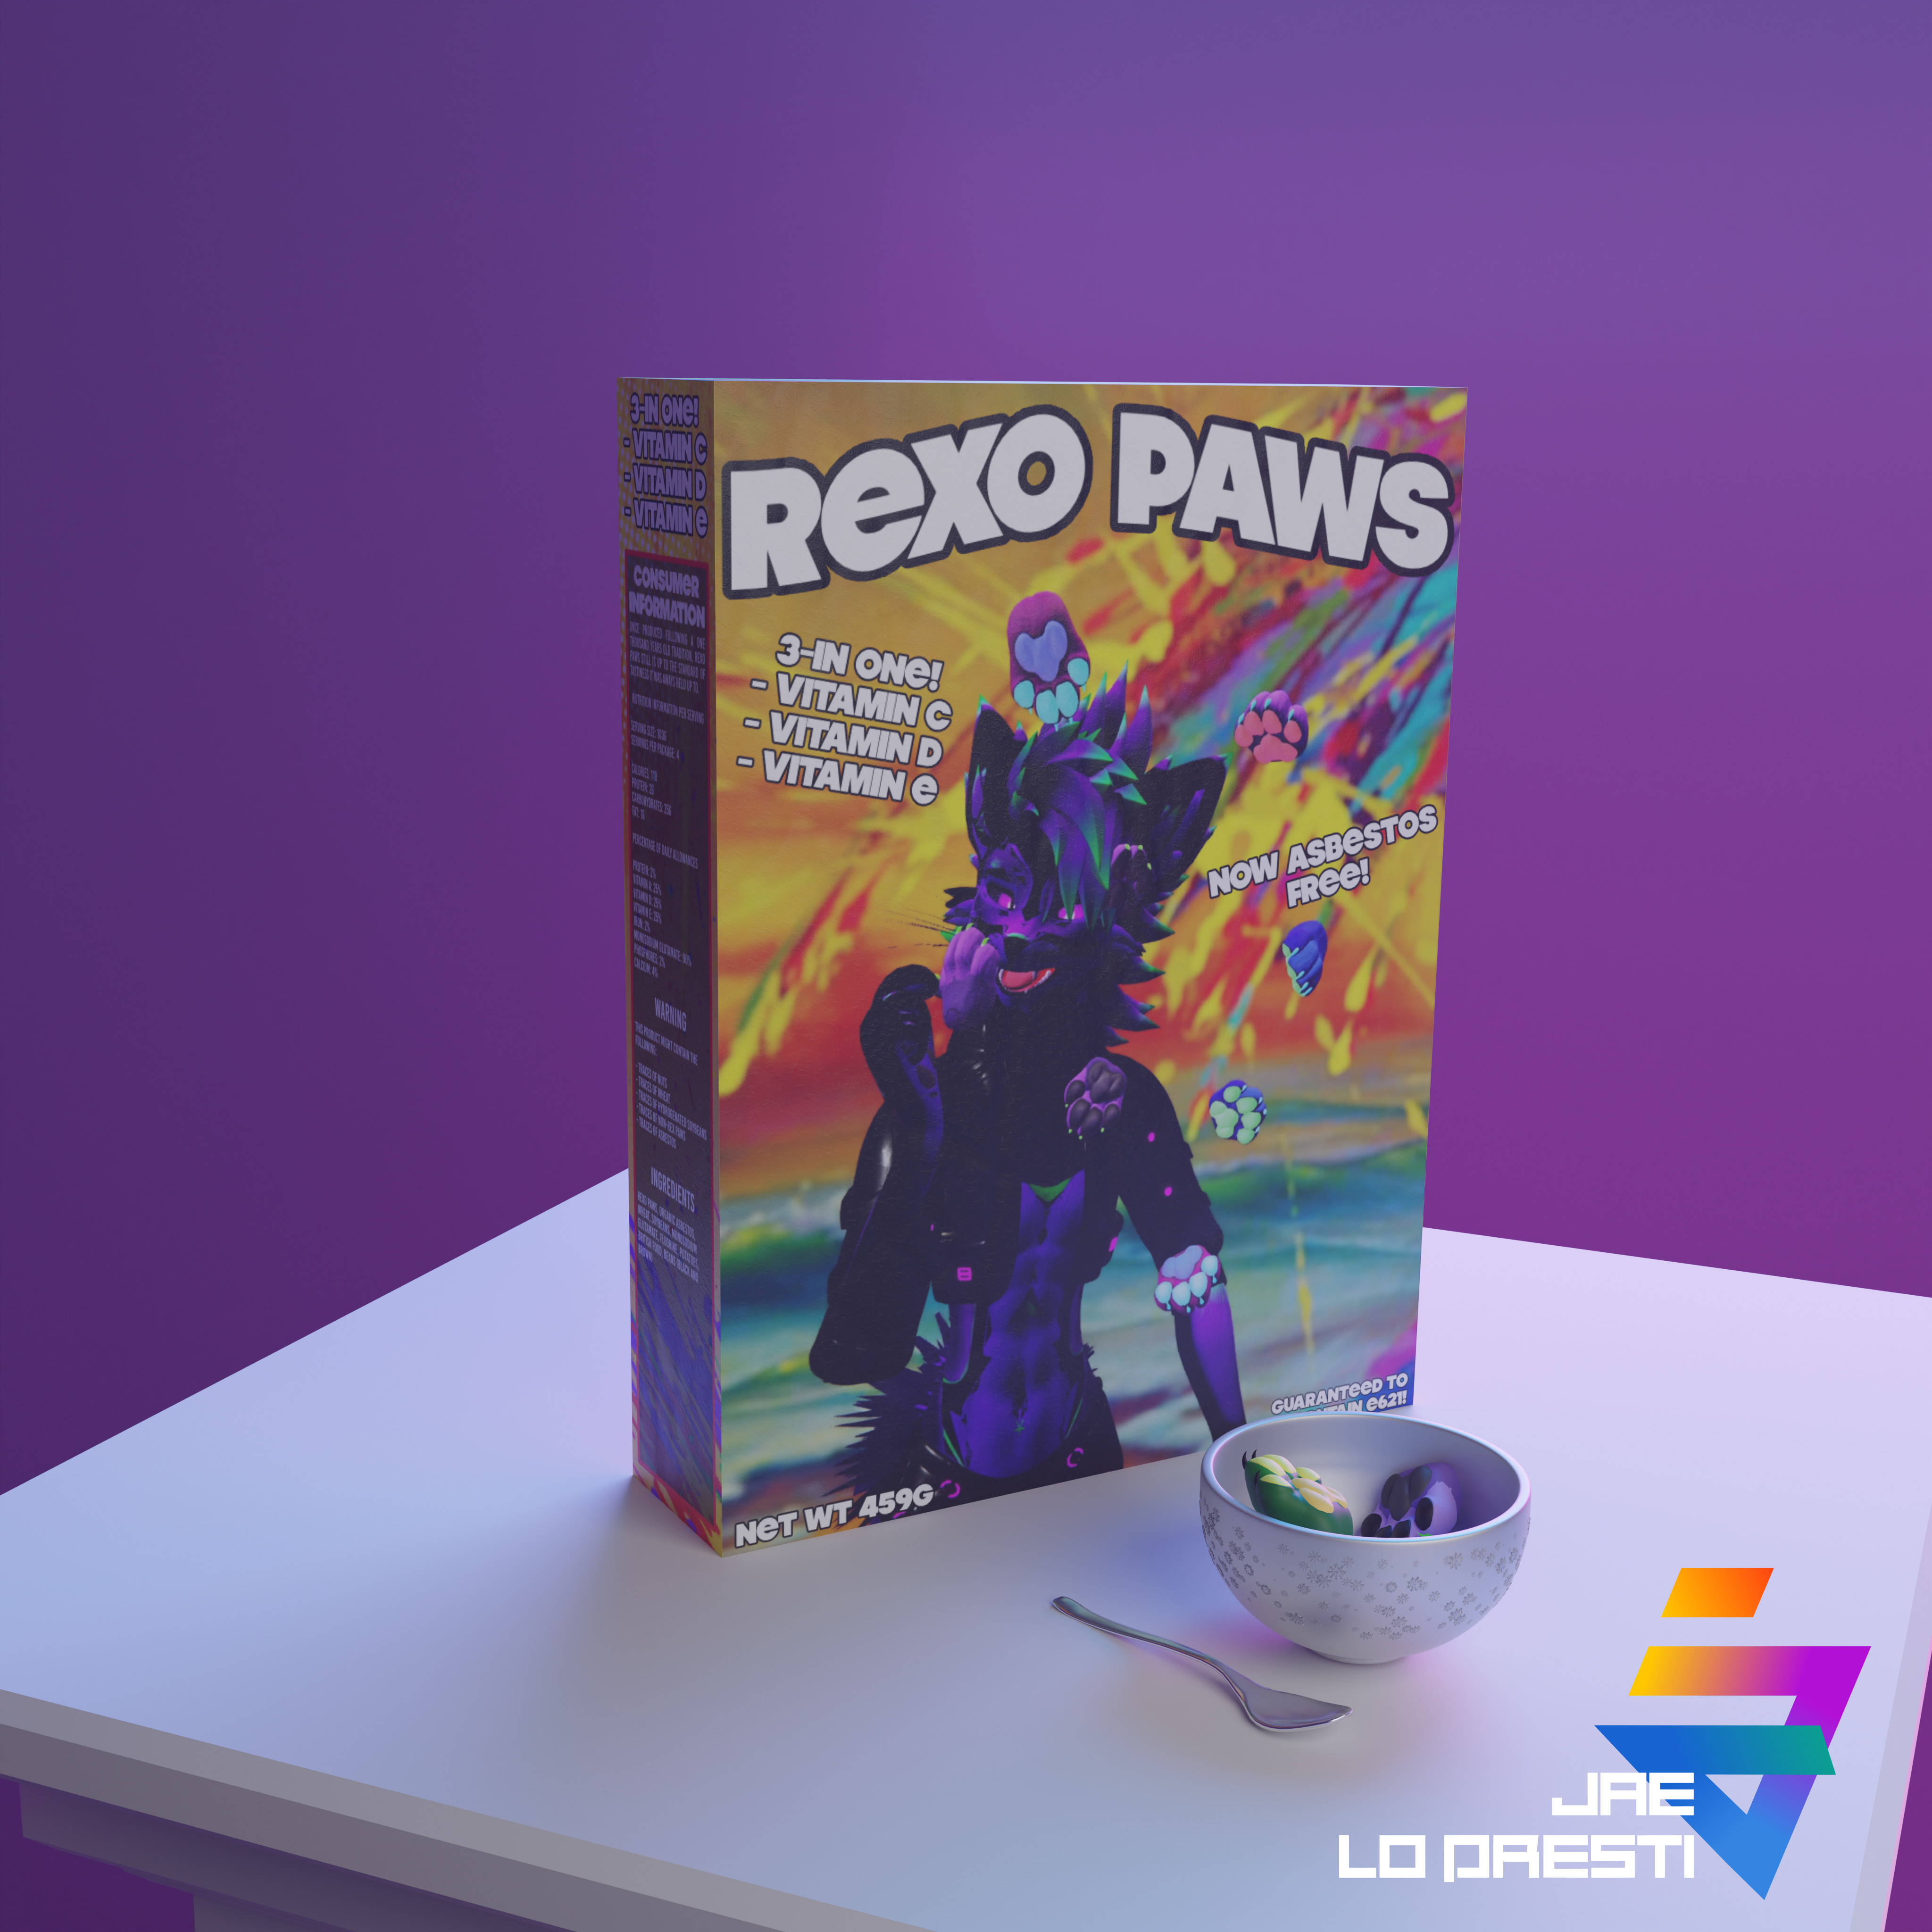 Cereal box of the fake brand "Rexo Paws" well lit and with a bowl filled with paws on the same table.